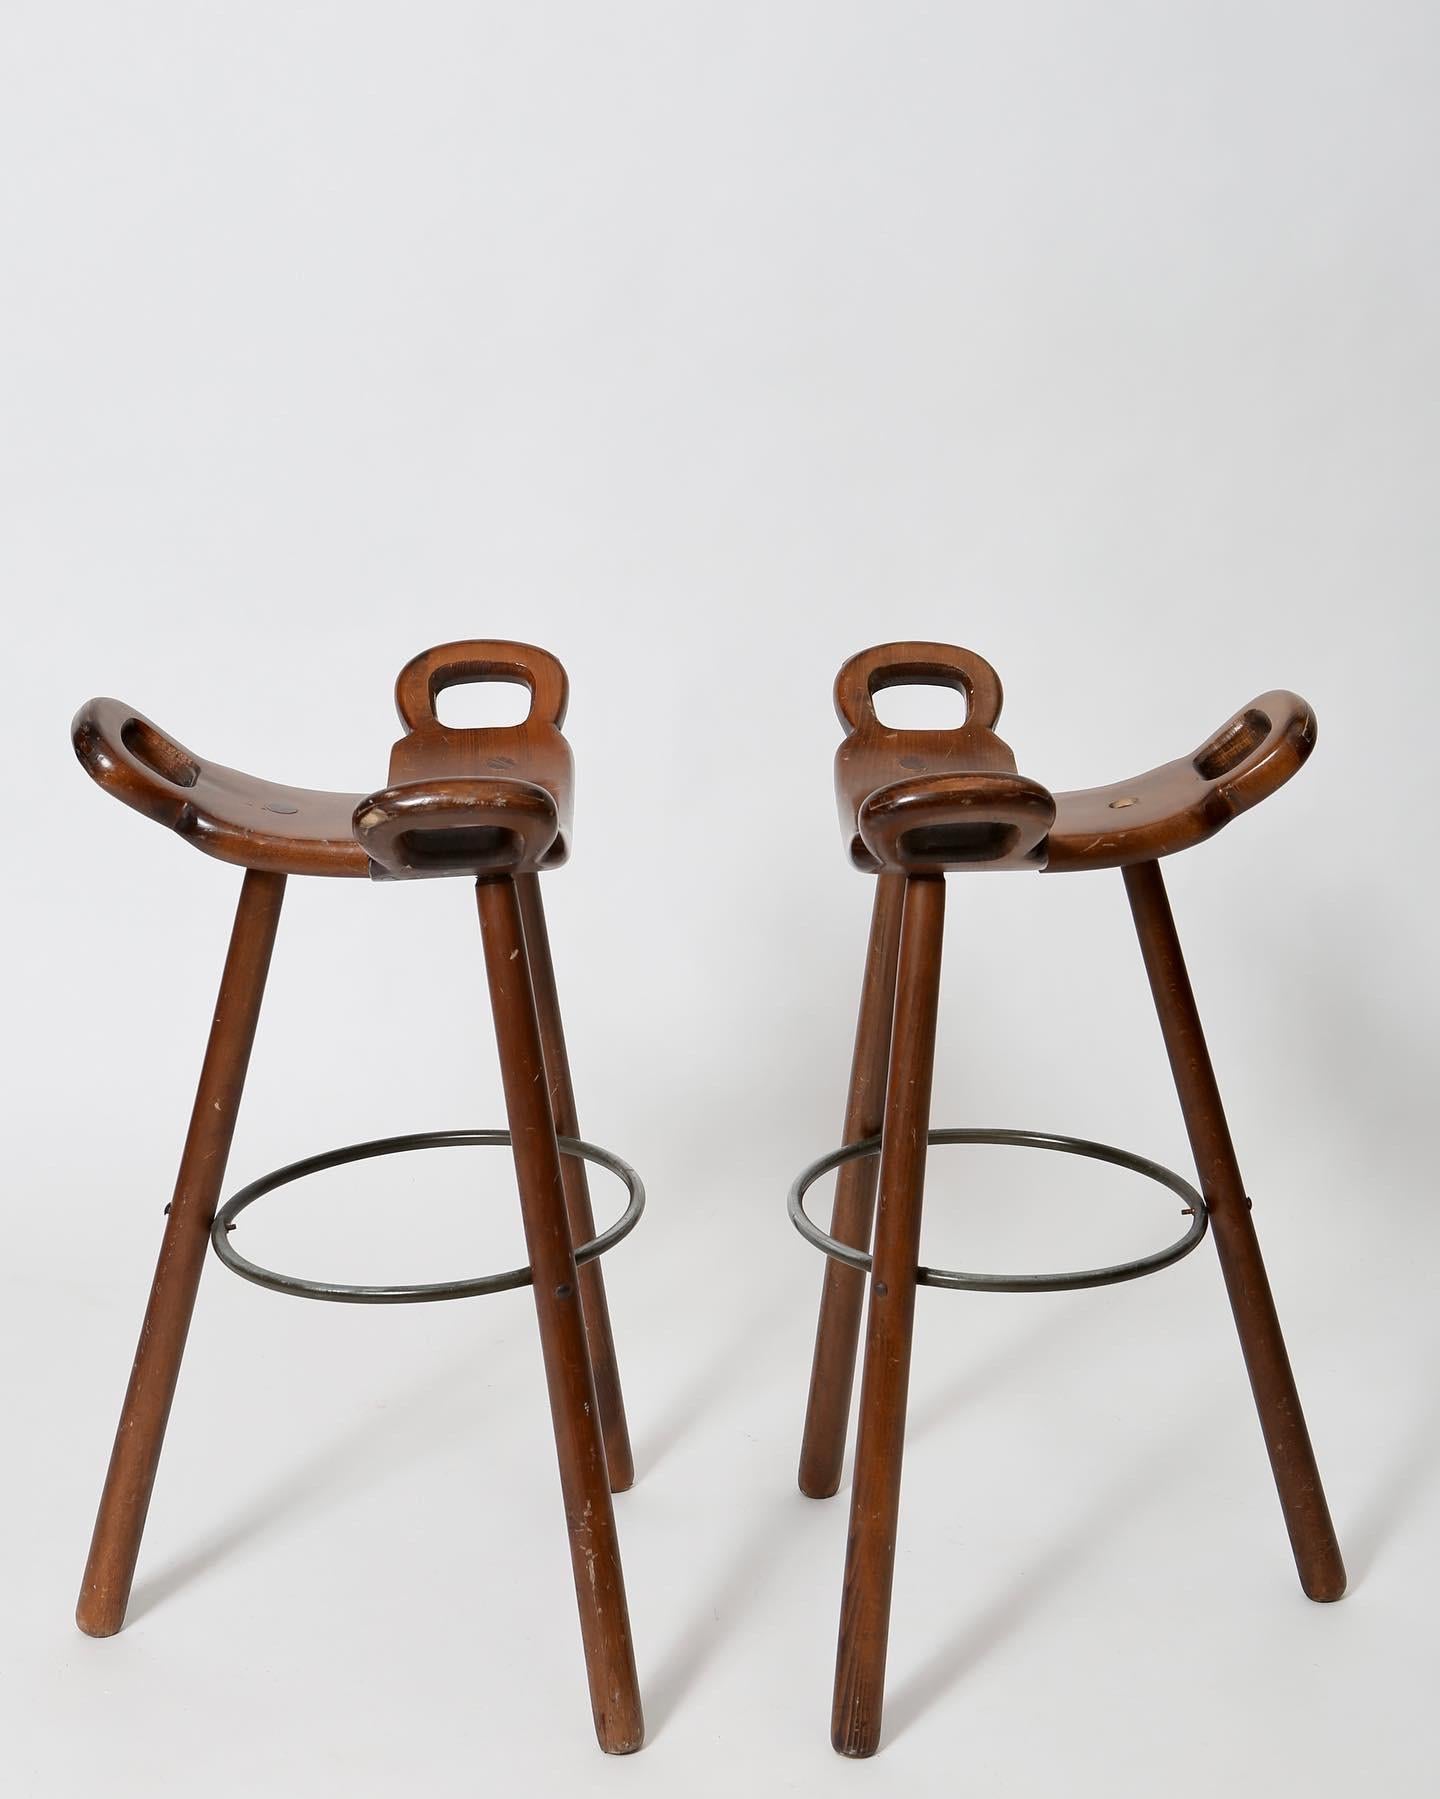 Pair stained beech barstools made in Spain, circa 1960s. Steel and wood. Charming folk brutalist styling. Comfortable and sculptural, with original finish and plenty of character. Standard bar height with seats at 30”.